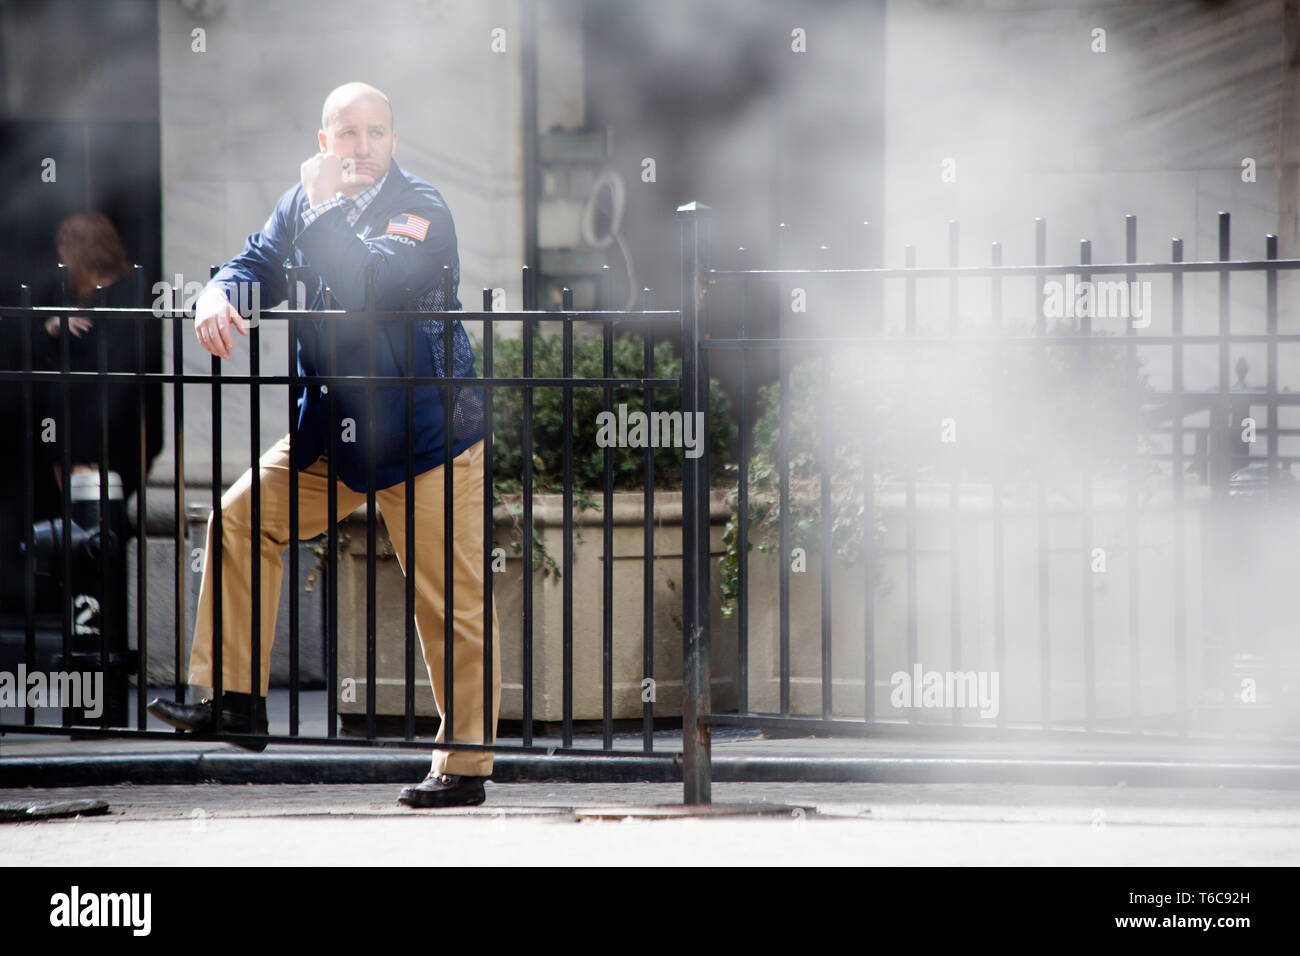 A floor trader takes a cigarette break outside tne NYSE Euronext Stock Exchange on Wall Street. He is halfway hidden by the steam leaking from the underground steam power pipes that provide many Manhattan office buildings with cooling power. Stock Photo